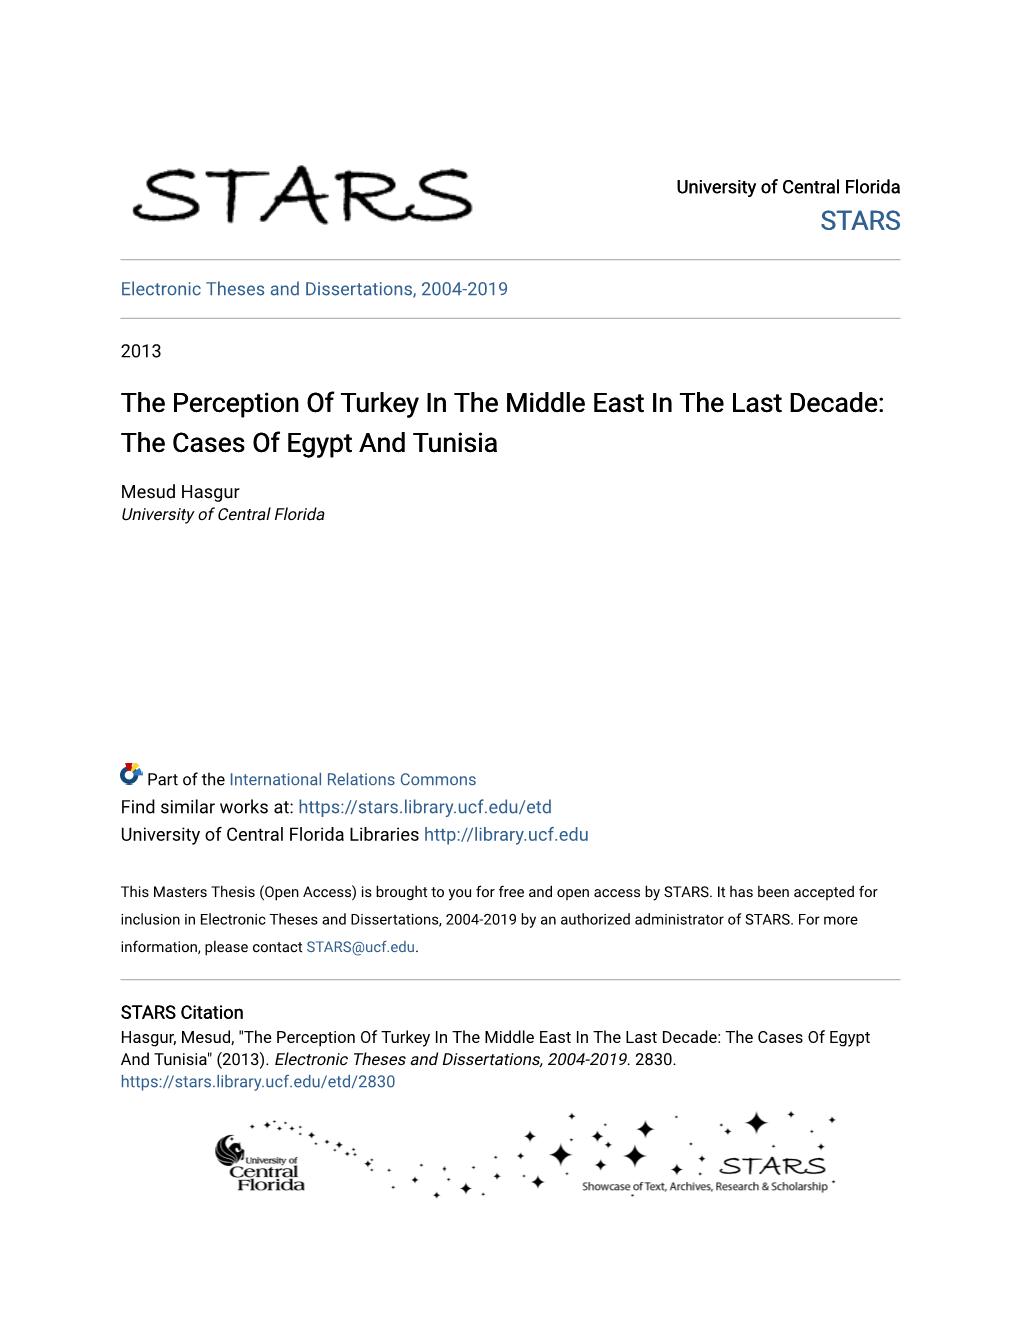 The Perception of Turkey in the Middle East in the Last Decade: the Cases of Egypt and Tunisia